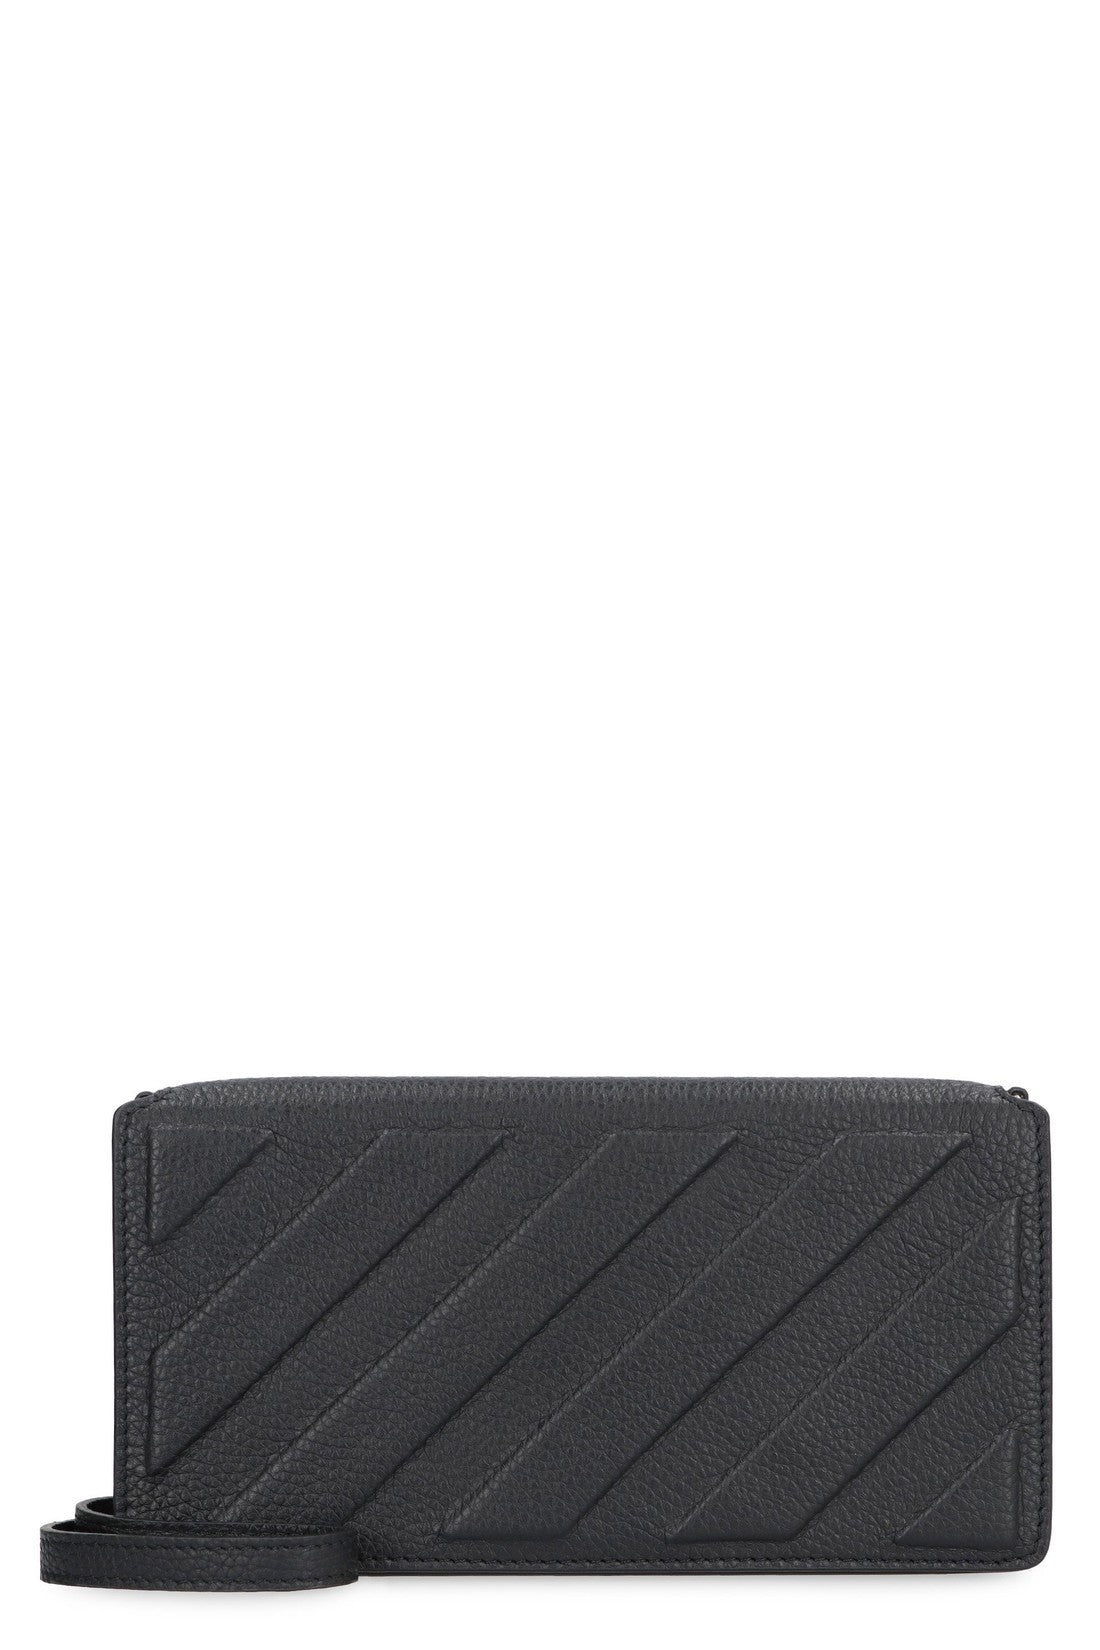 Off-White-OUTLET-SALE-Pebbled leather clutch-ARCHIVIST